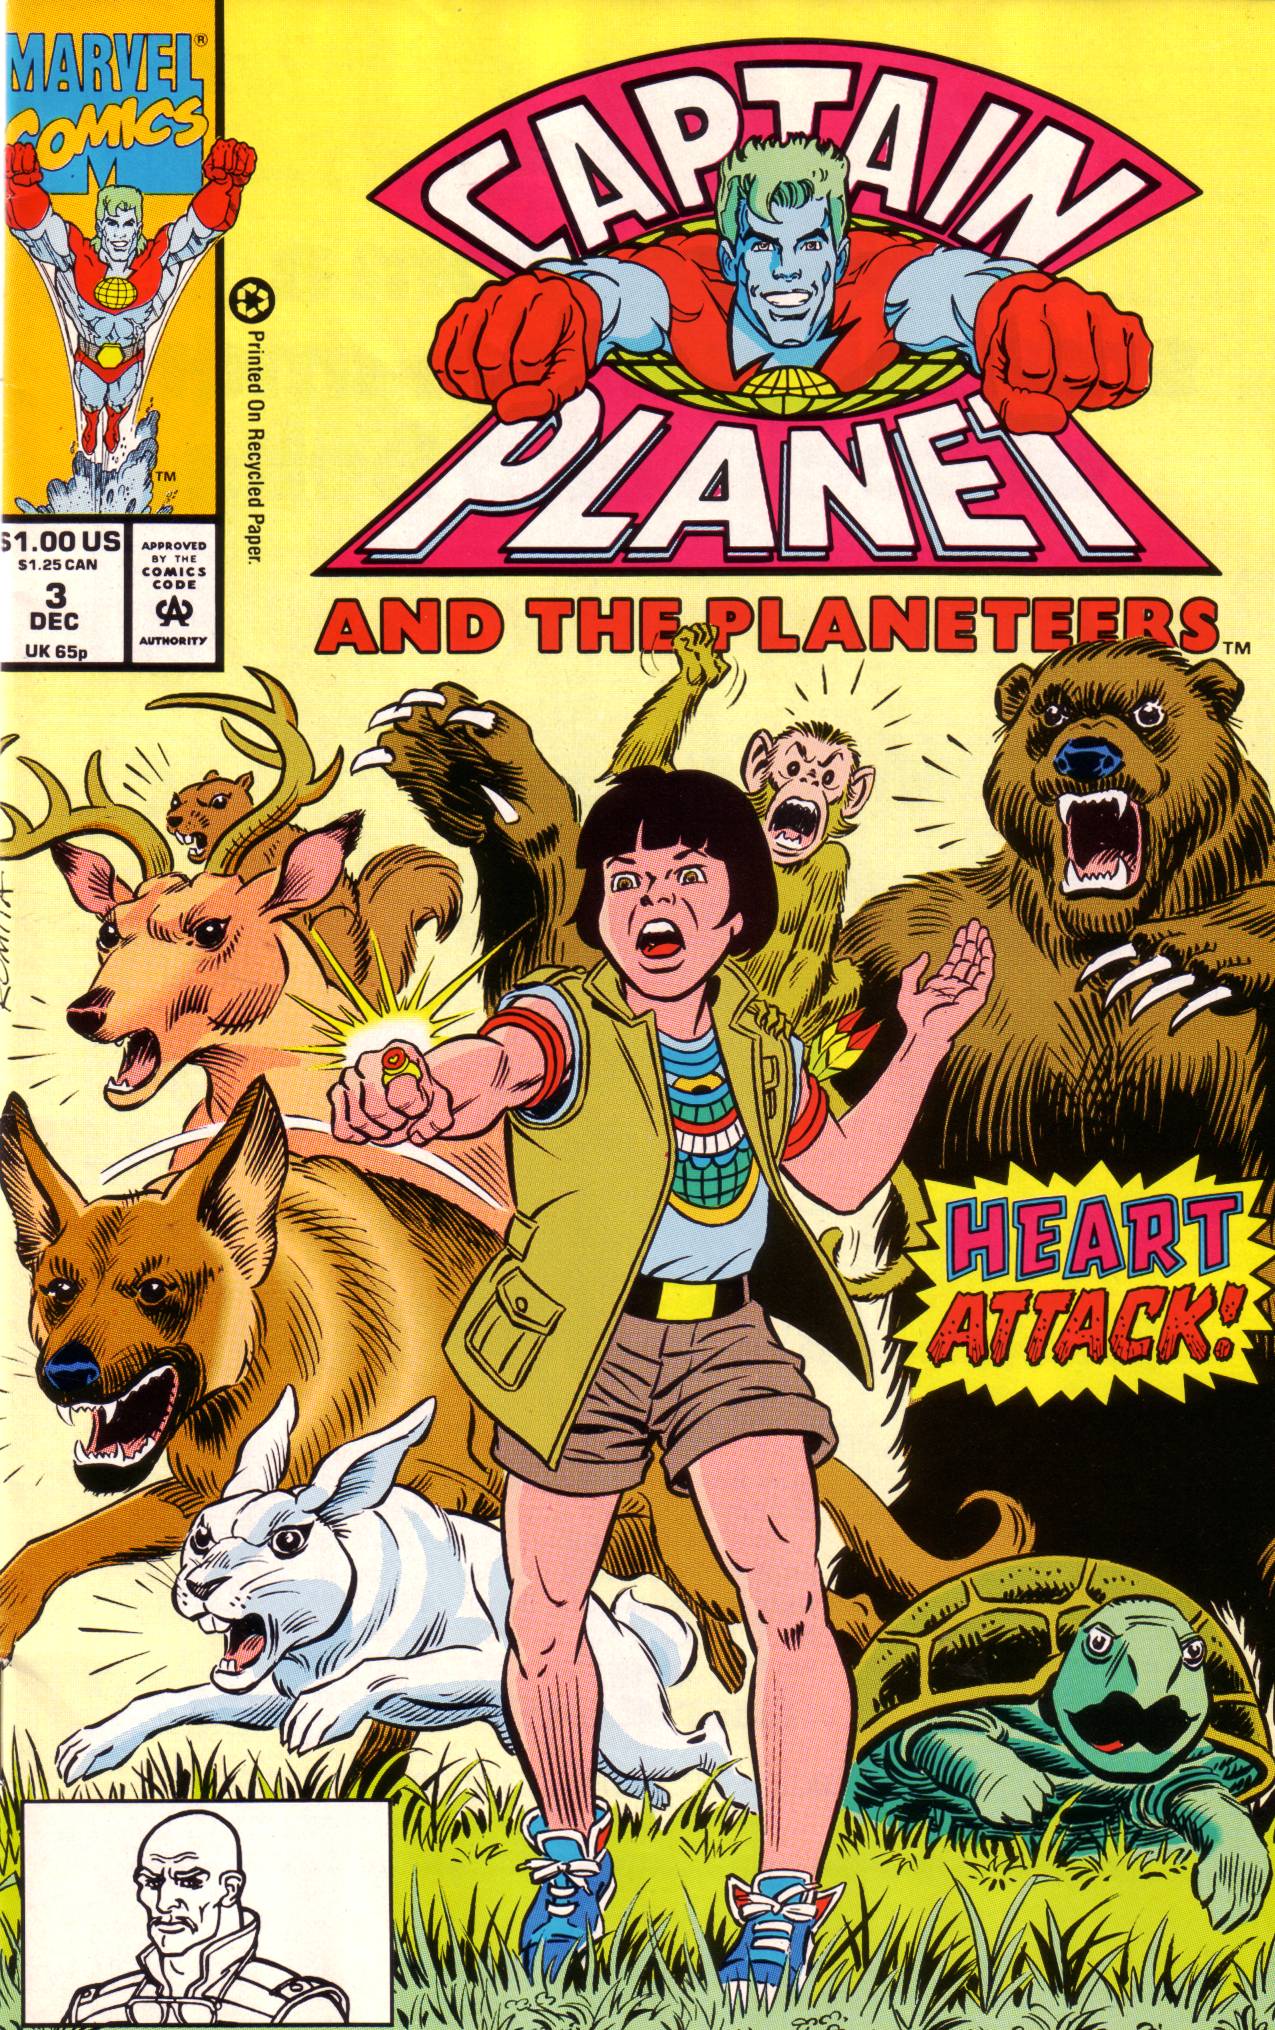 Captain Planet And The Planeteers Issue 3 | Read Captain Planet And The  Planeteers Issue 3 comic online in high quality. Read Full Comic online for  free - Read comics online in